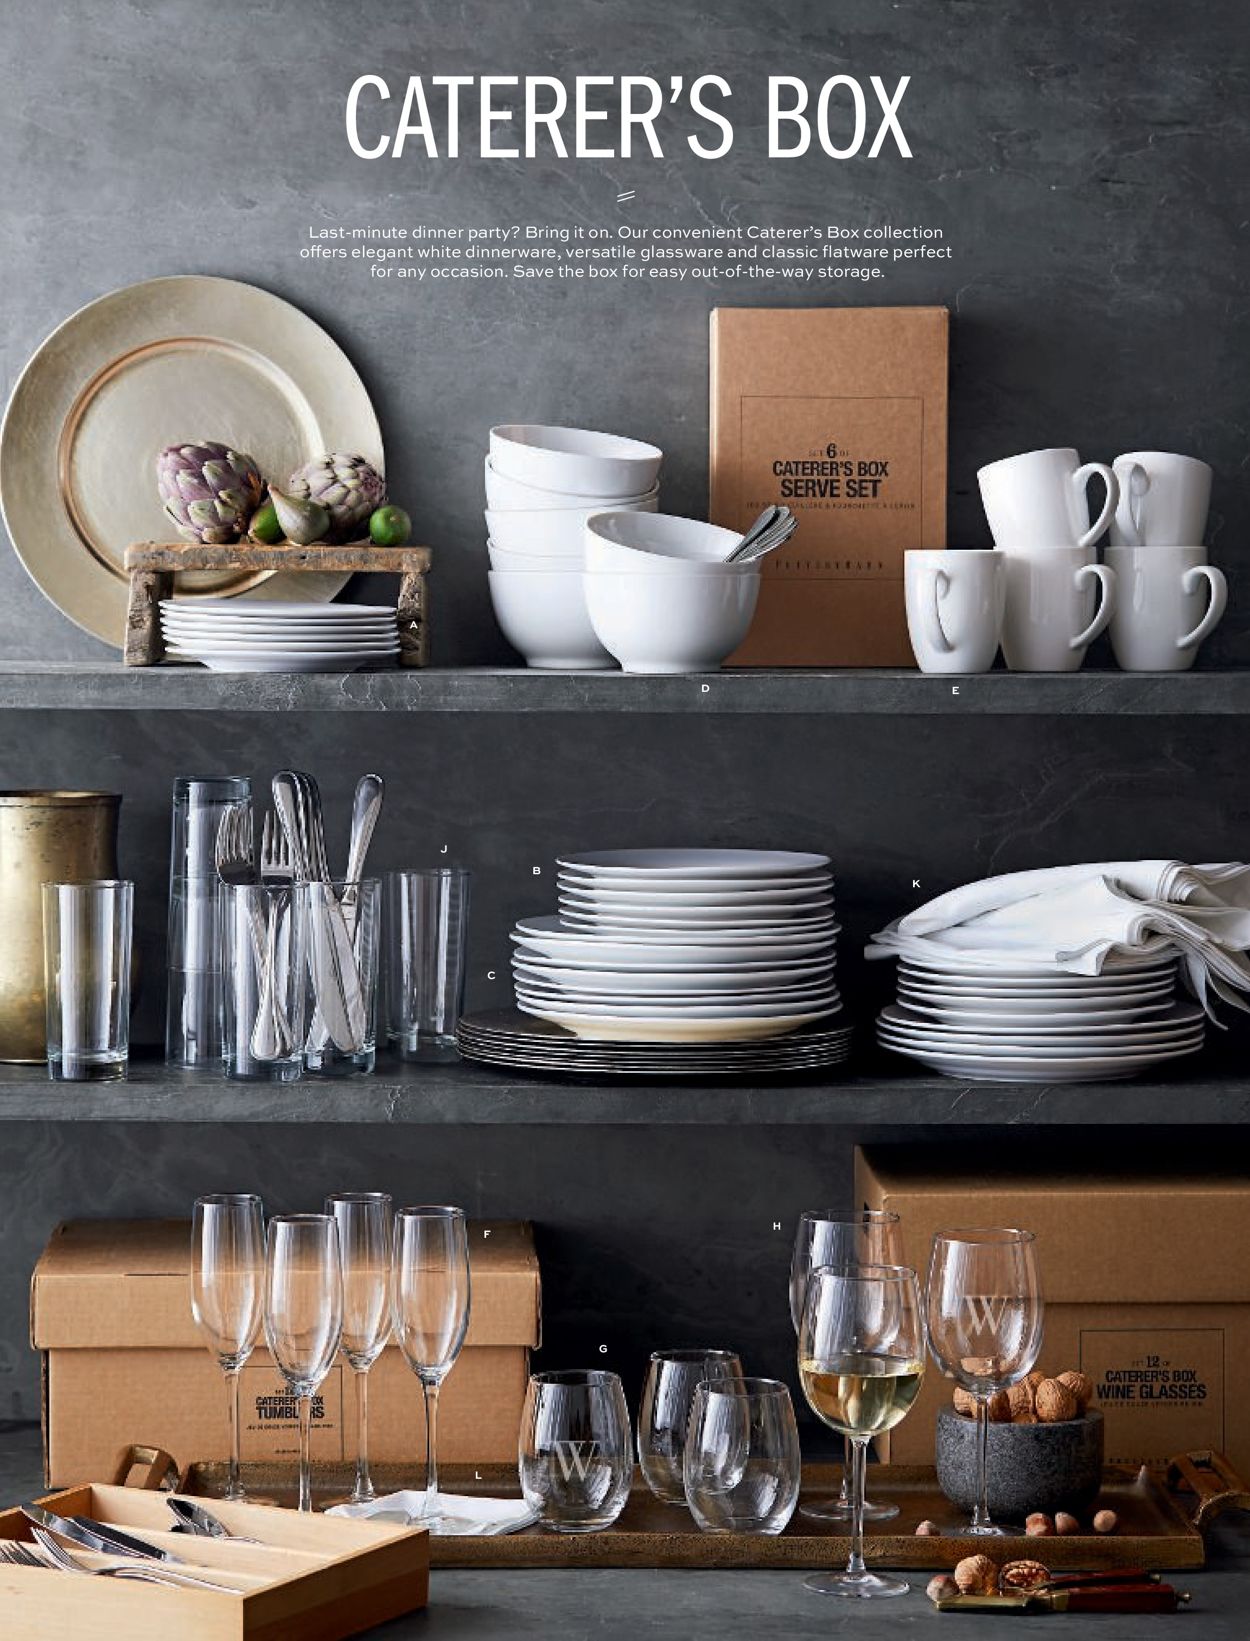 Pottery Barn Ad from 11/12/2019